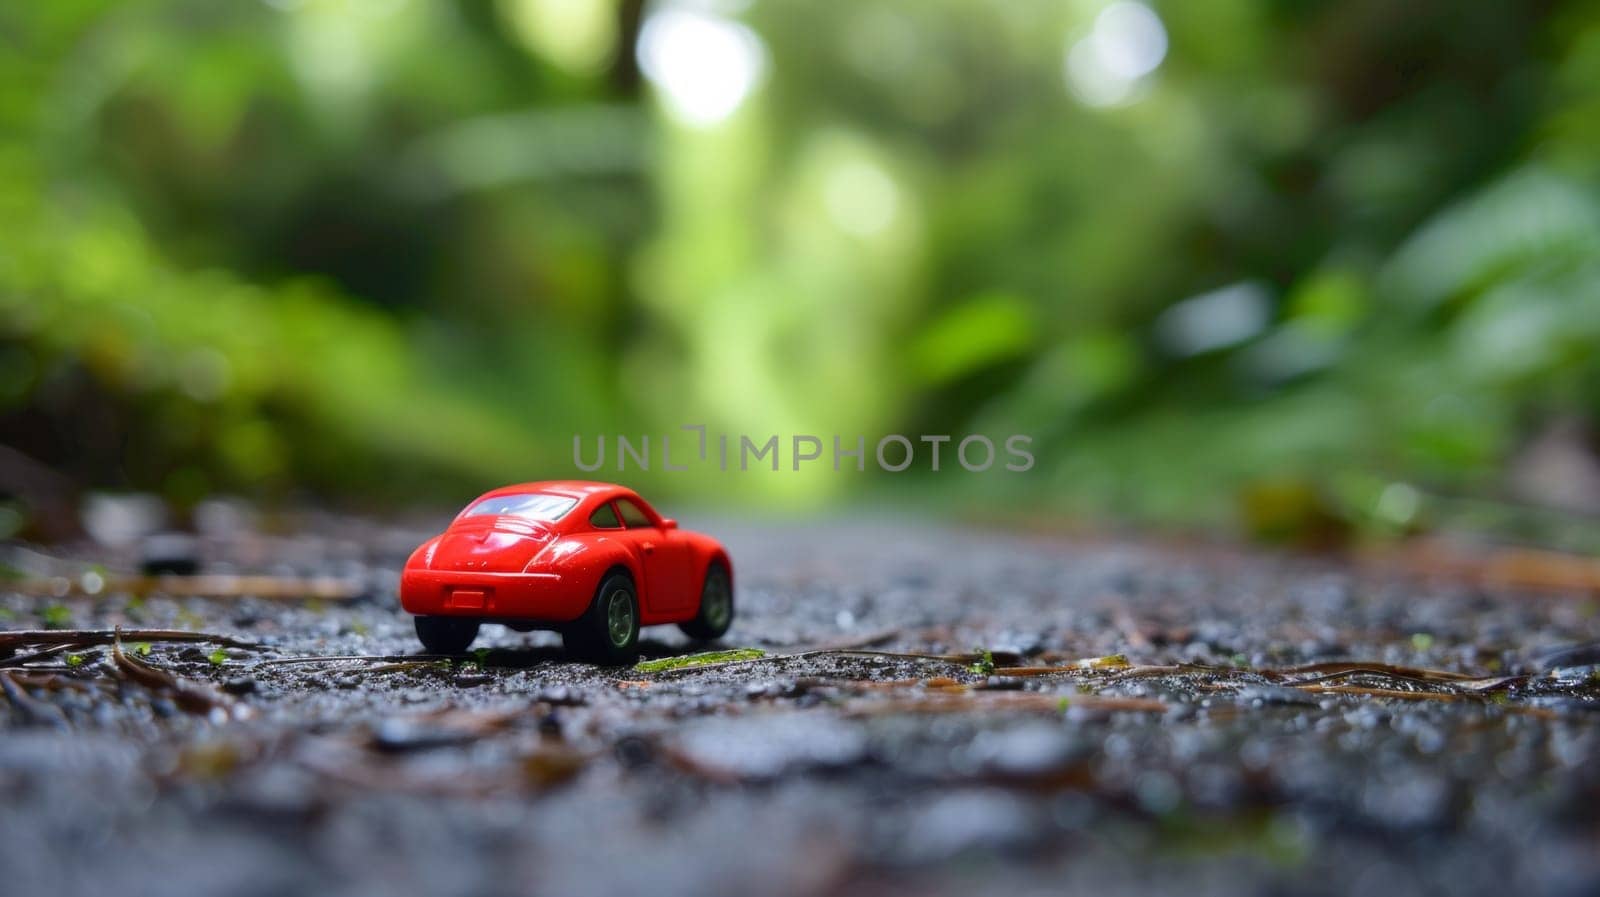 A red toy car on a dirt road in the woods